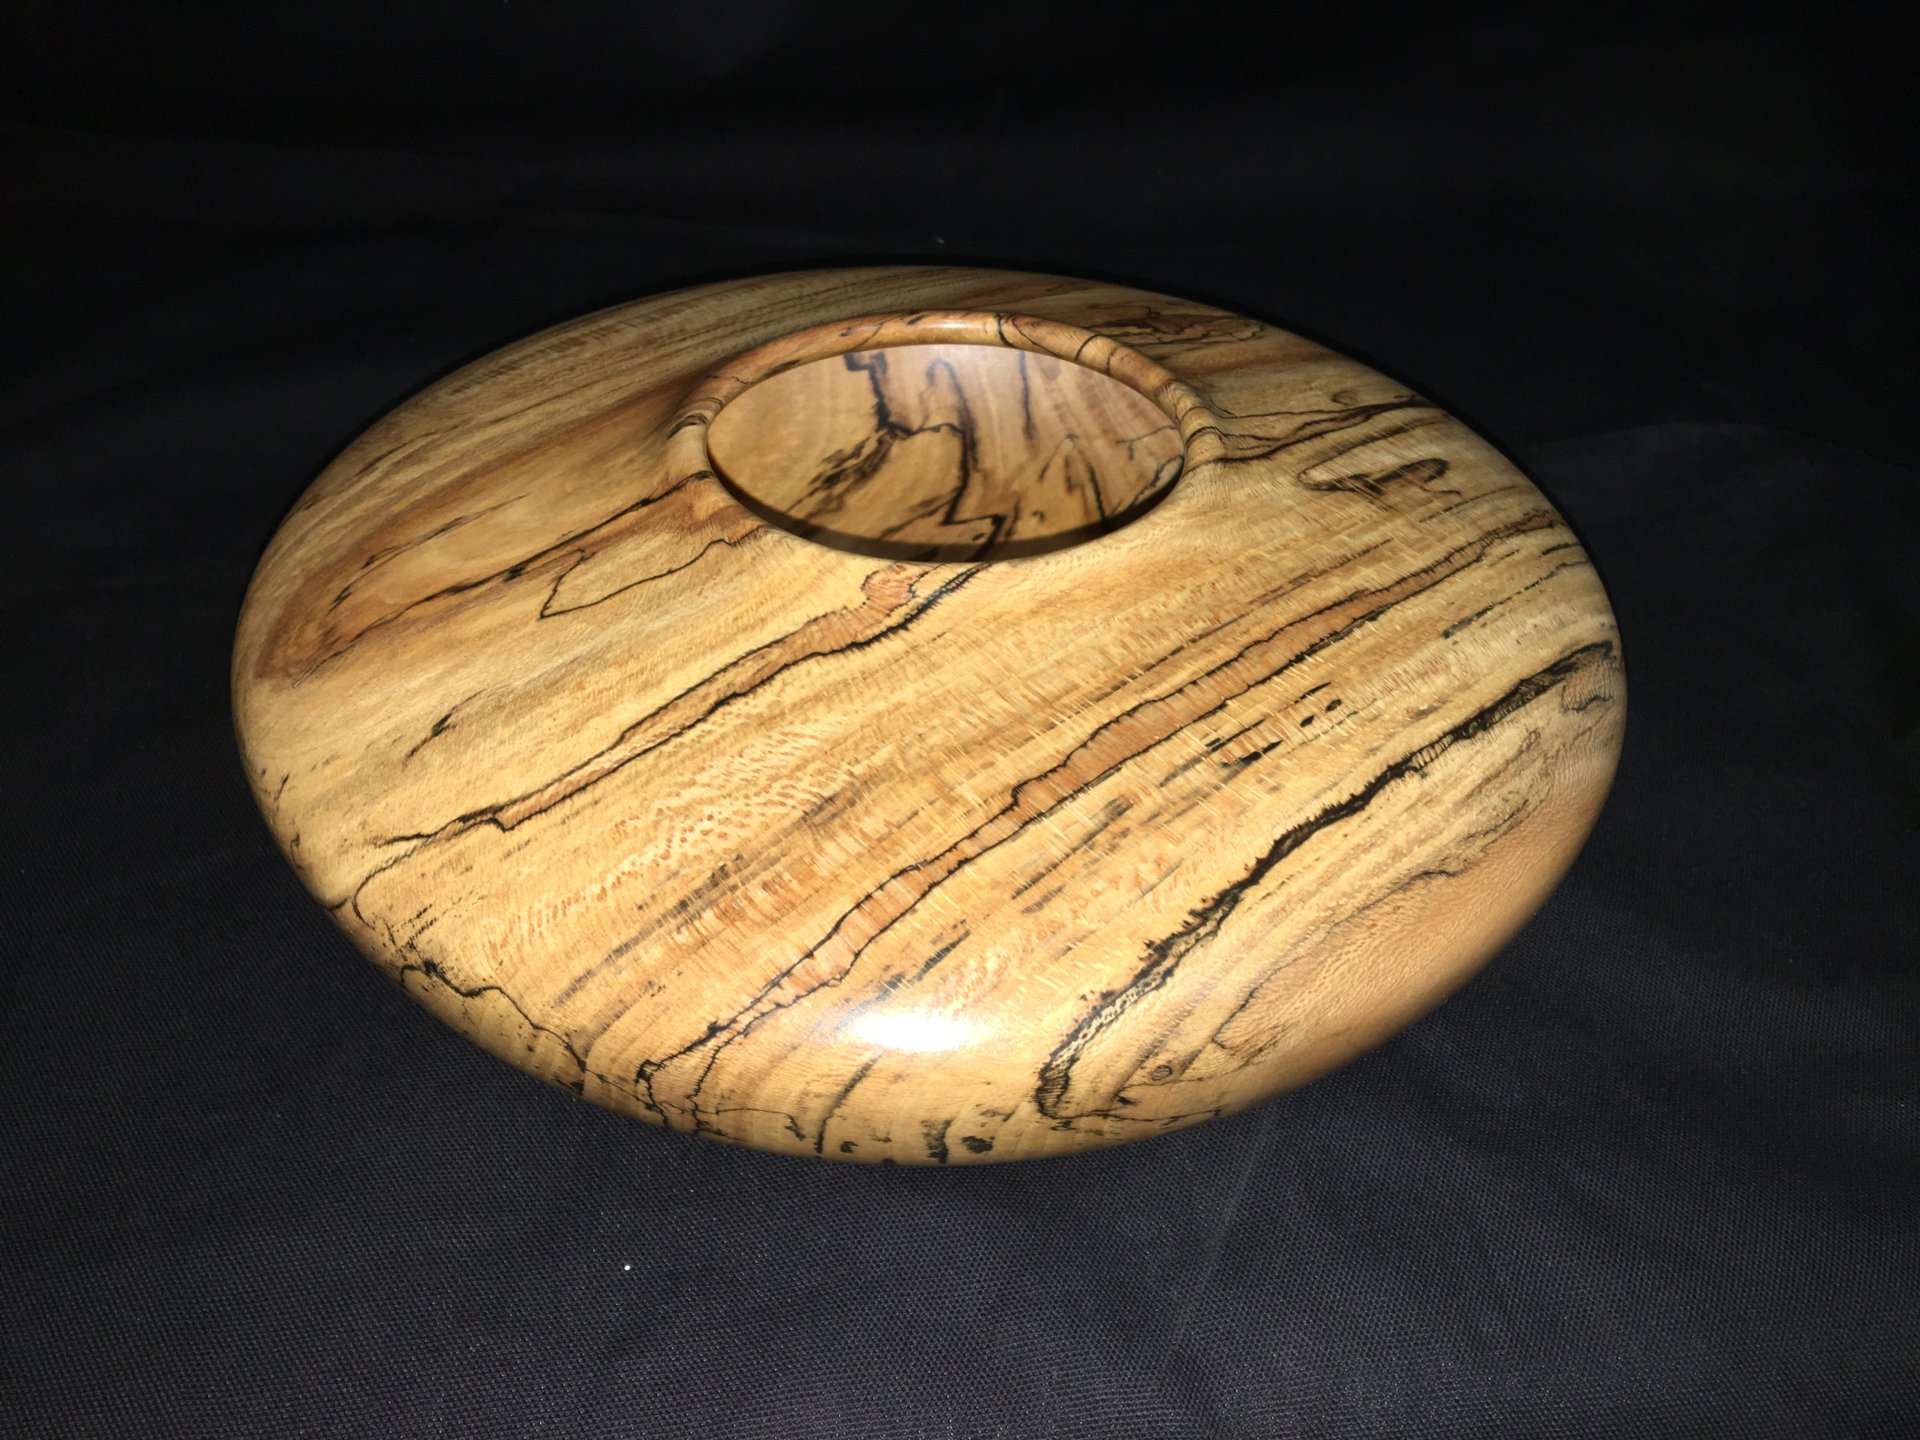 Spalted sycamore